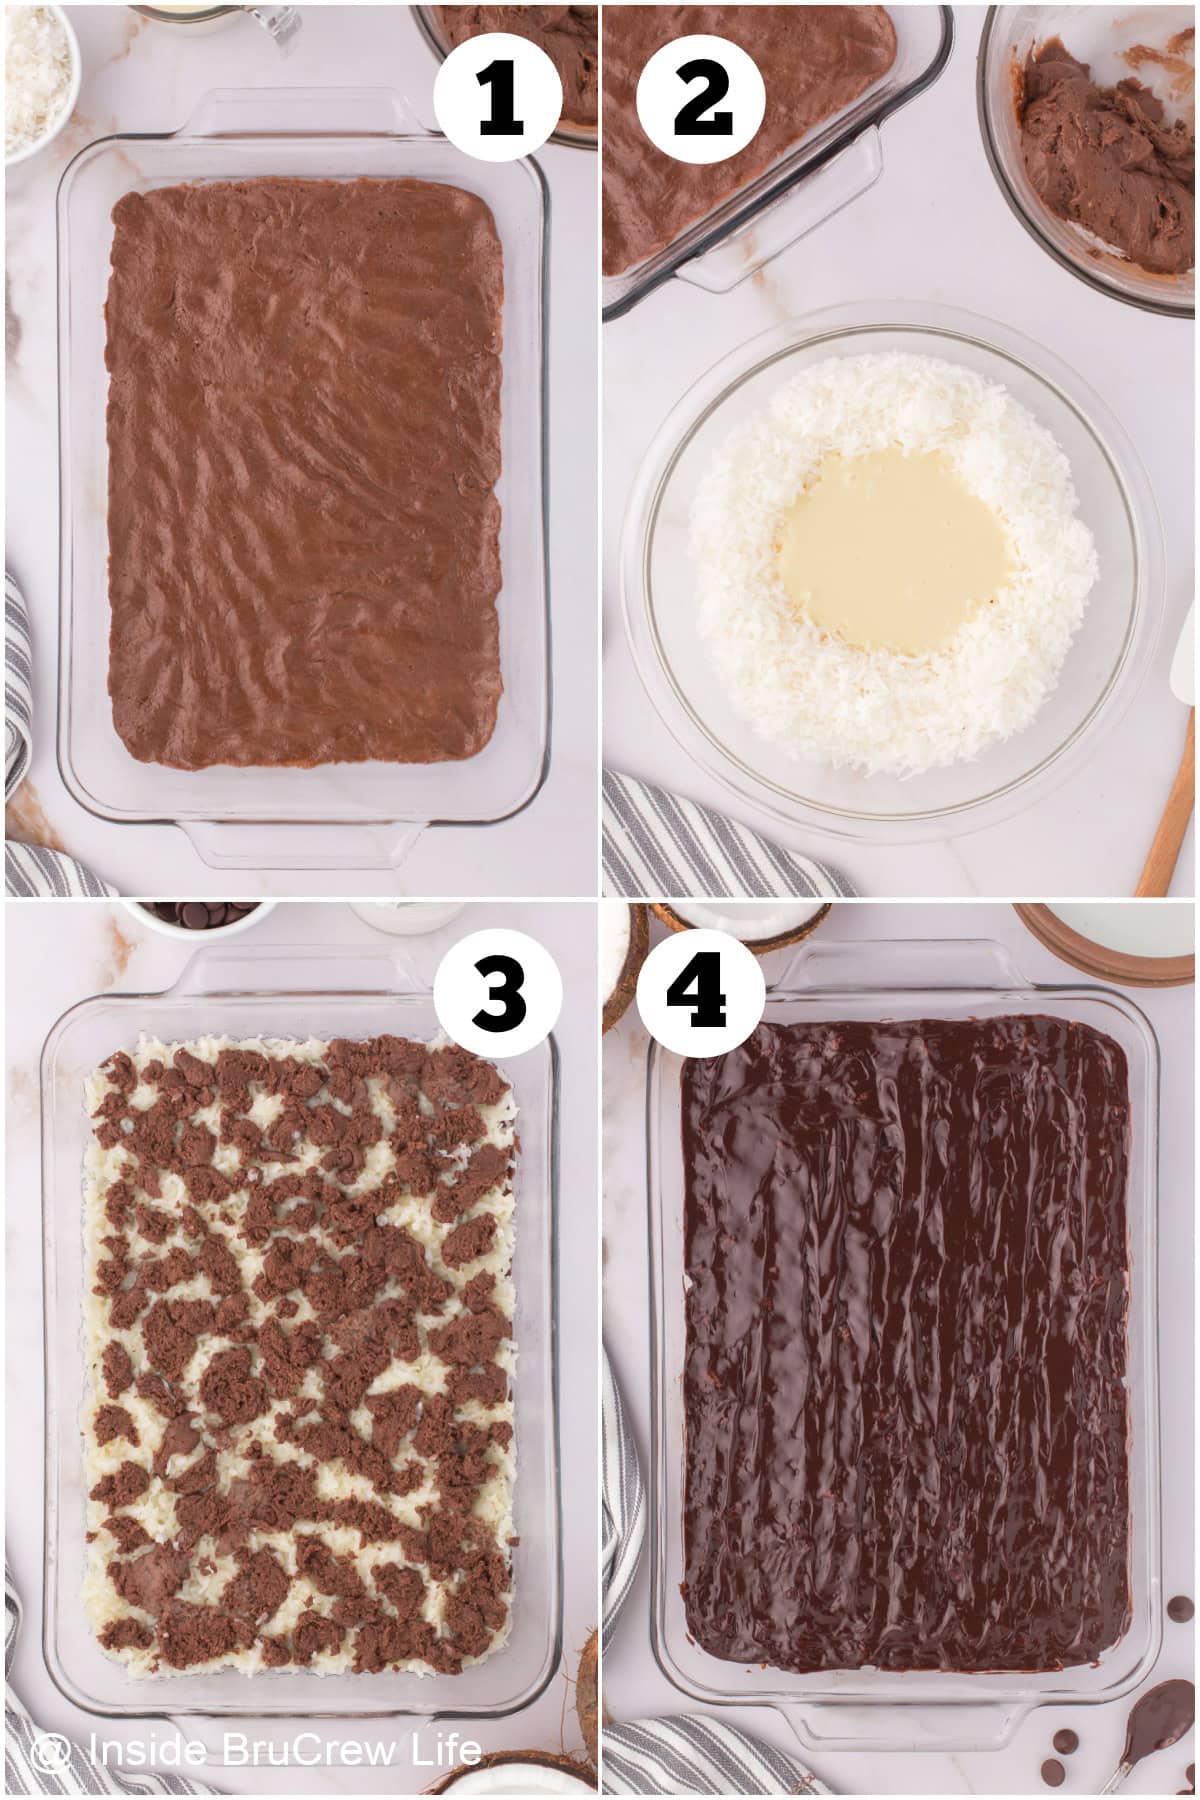 Four pictures collaged together showing how to make coconut bars with a chocolate cake mix.